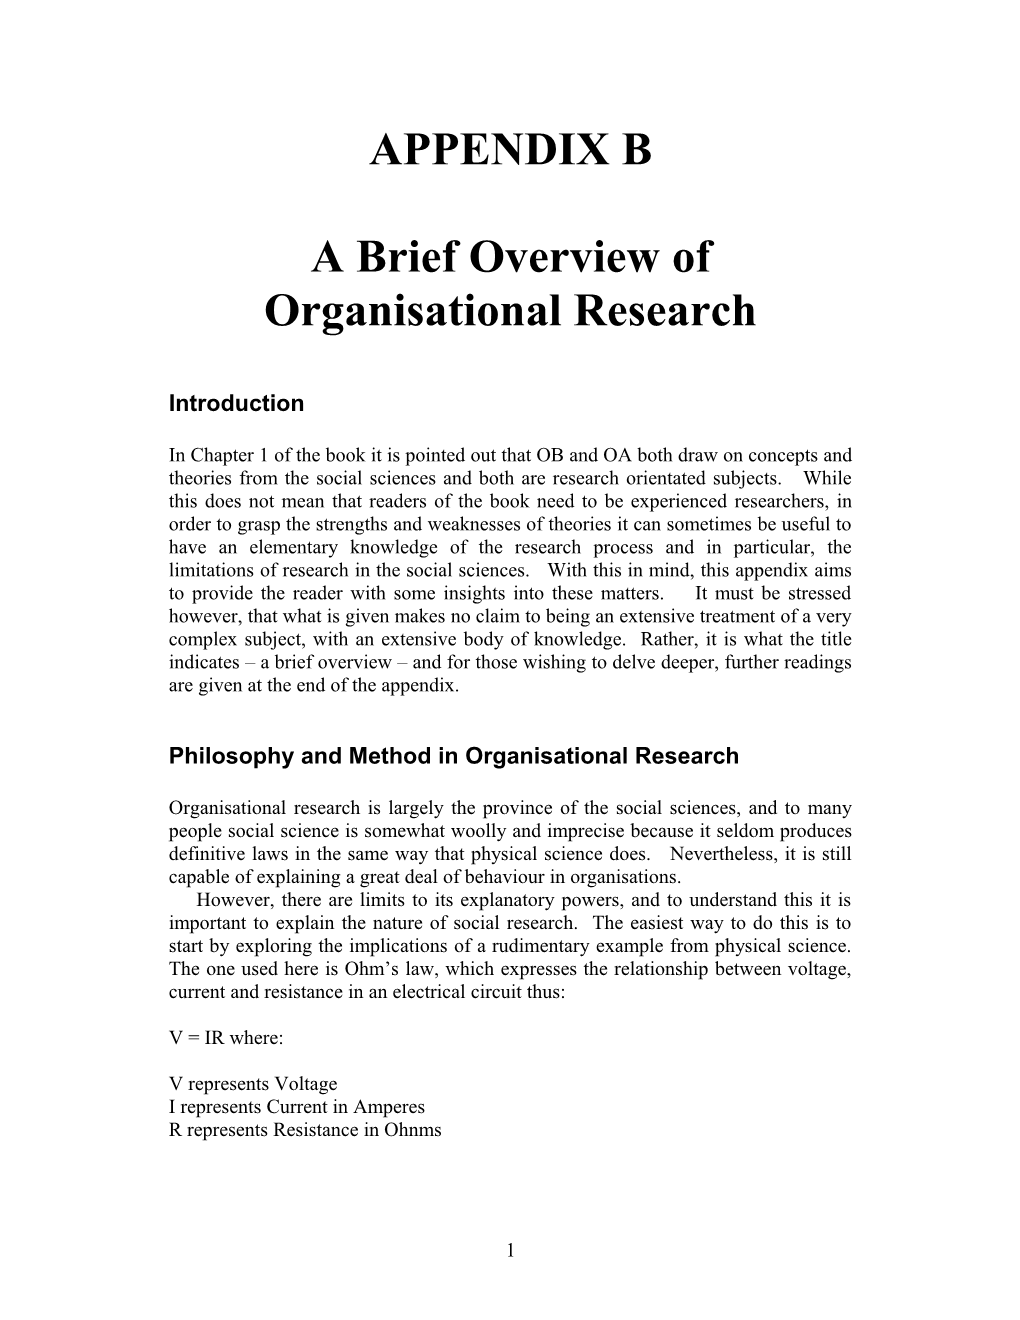 A Brief Overview of Organisational Research